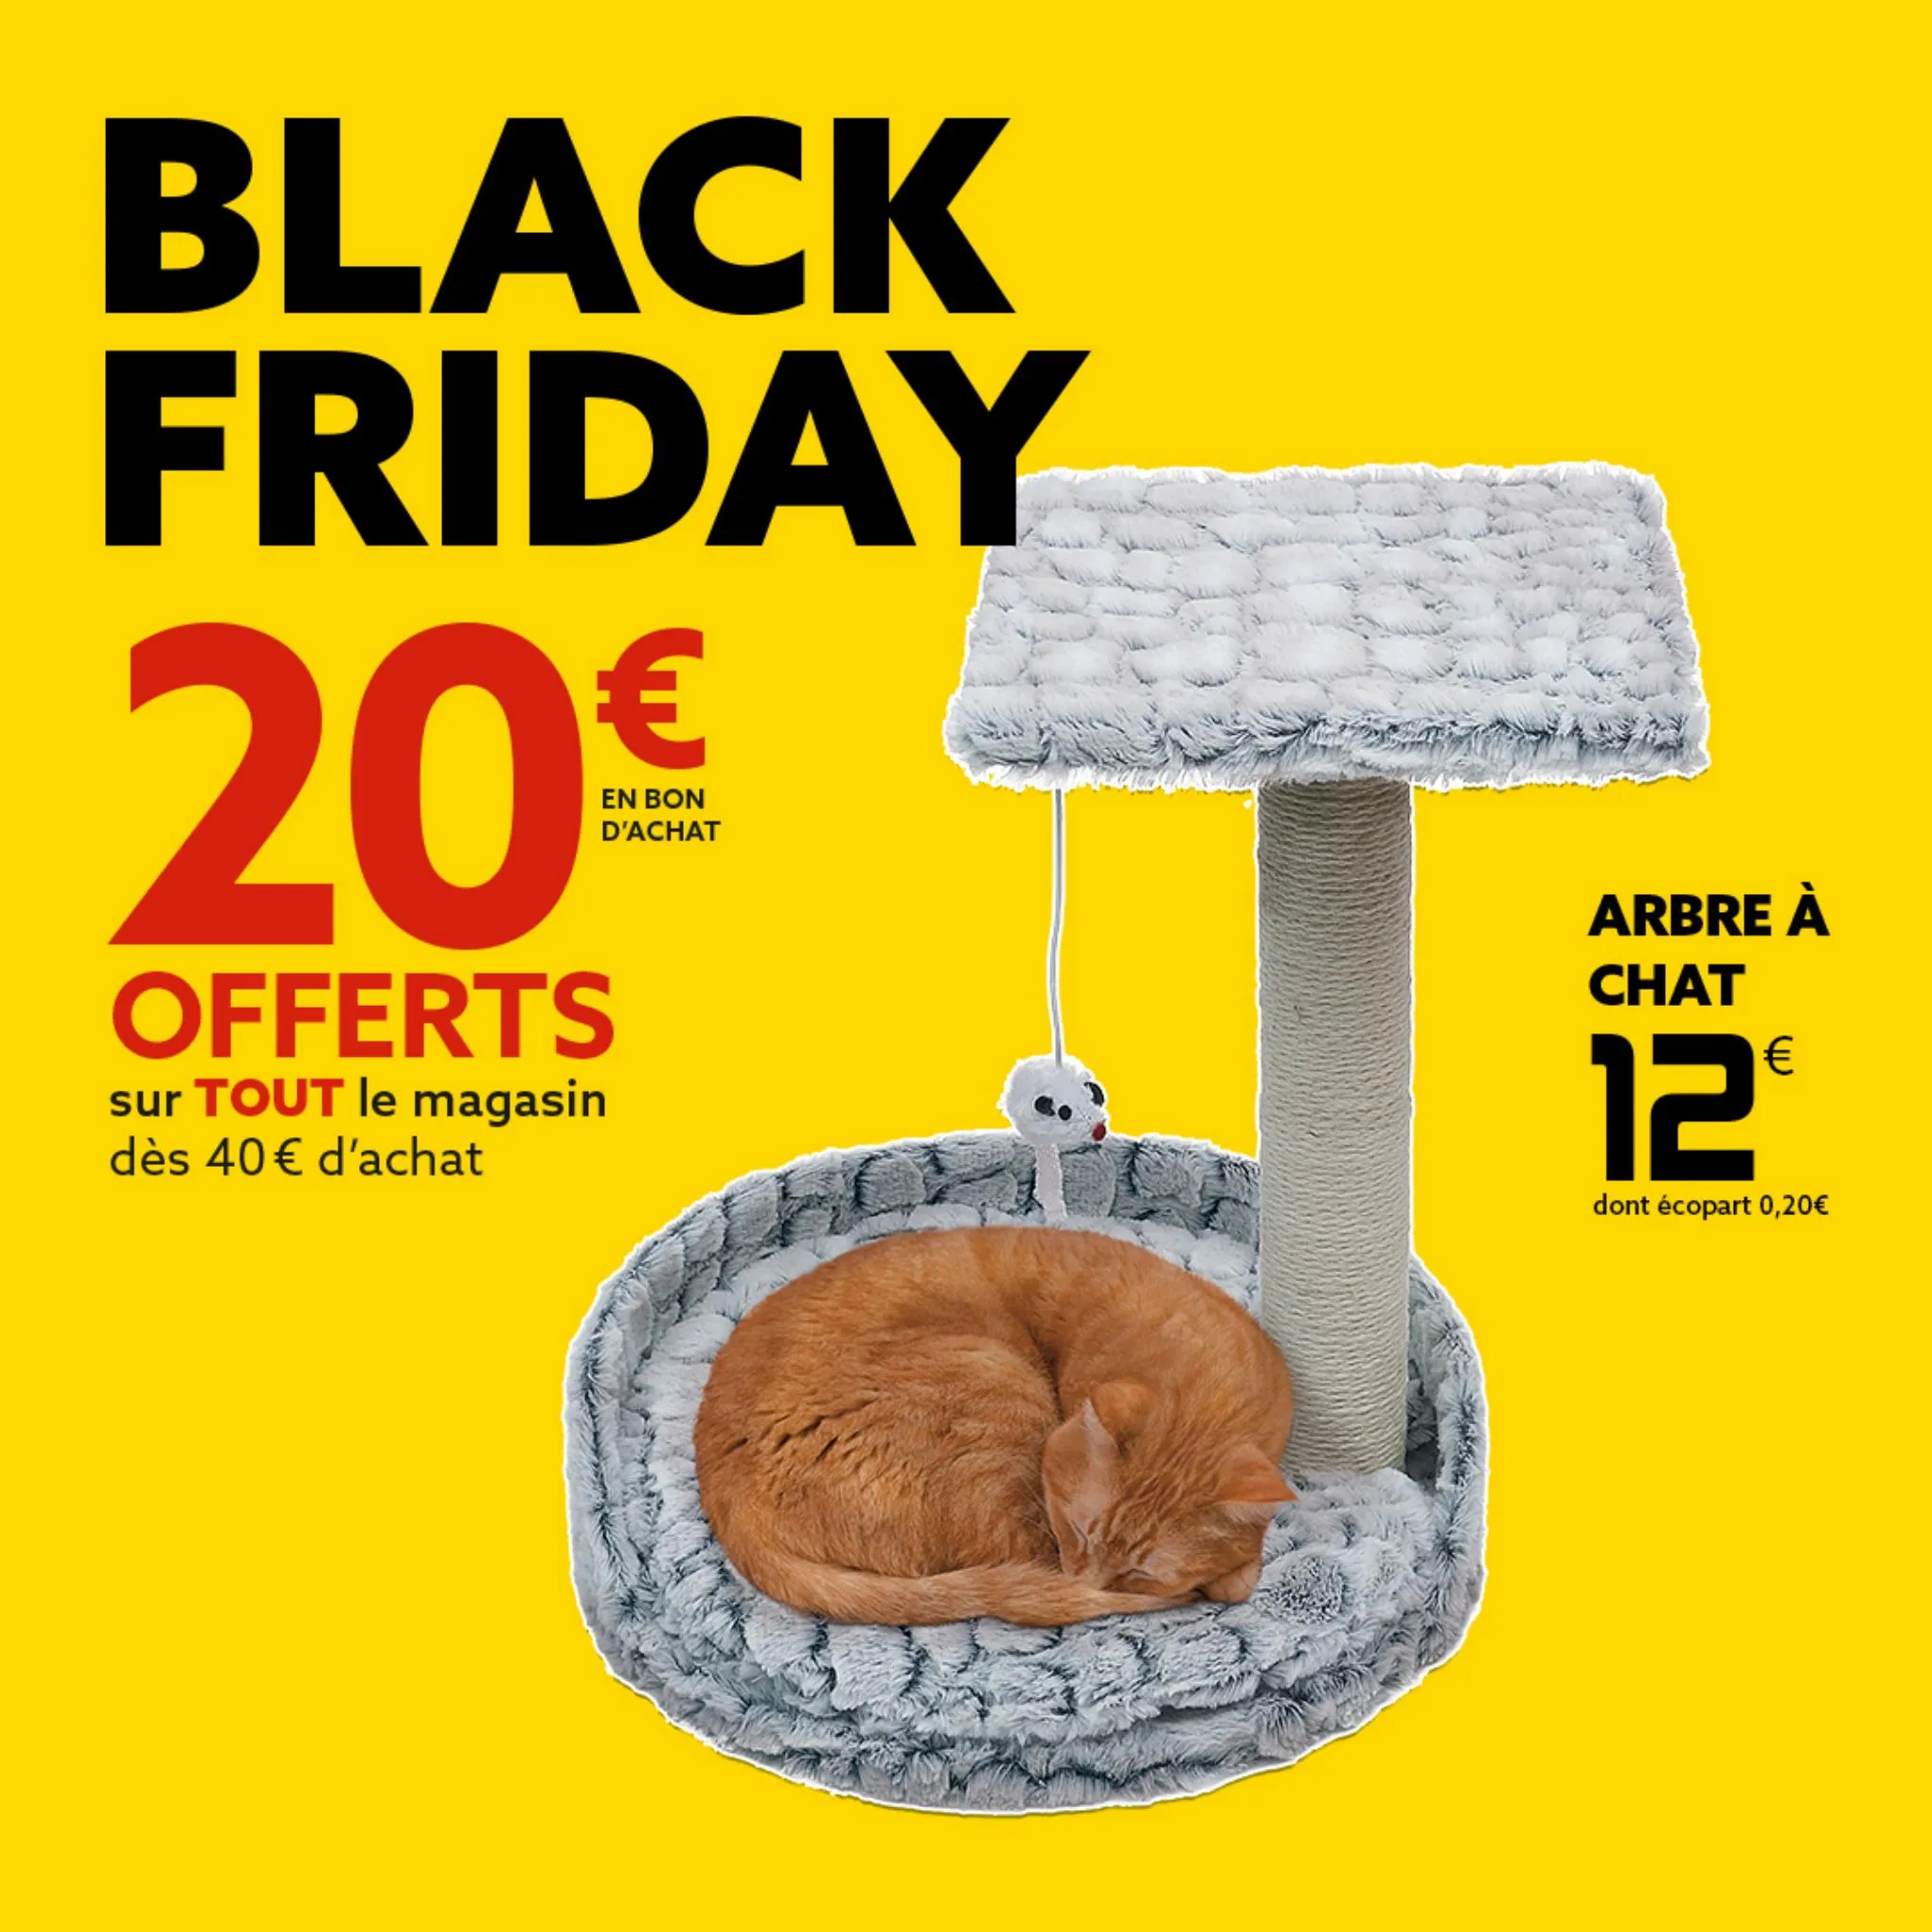 Catalogue Offres Gifi Black Friday, page 00002